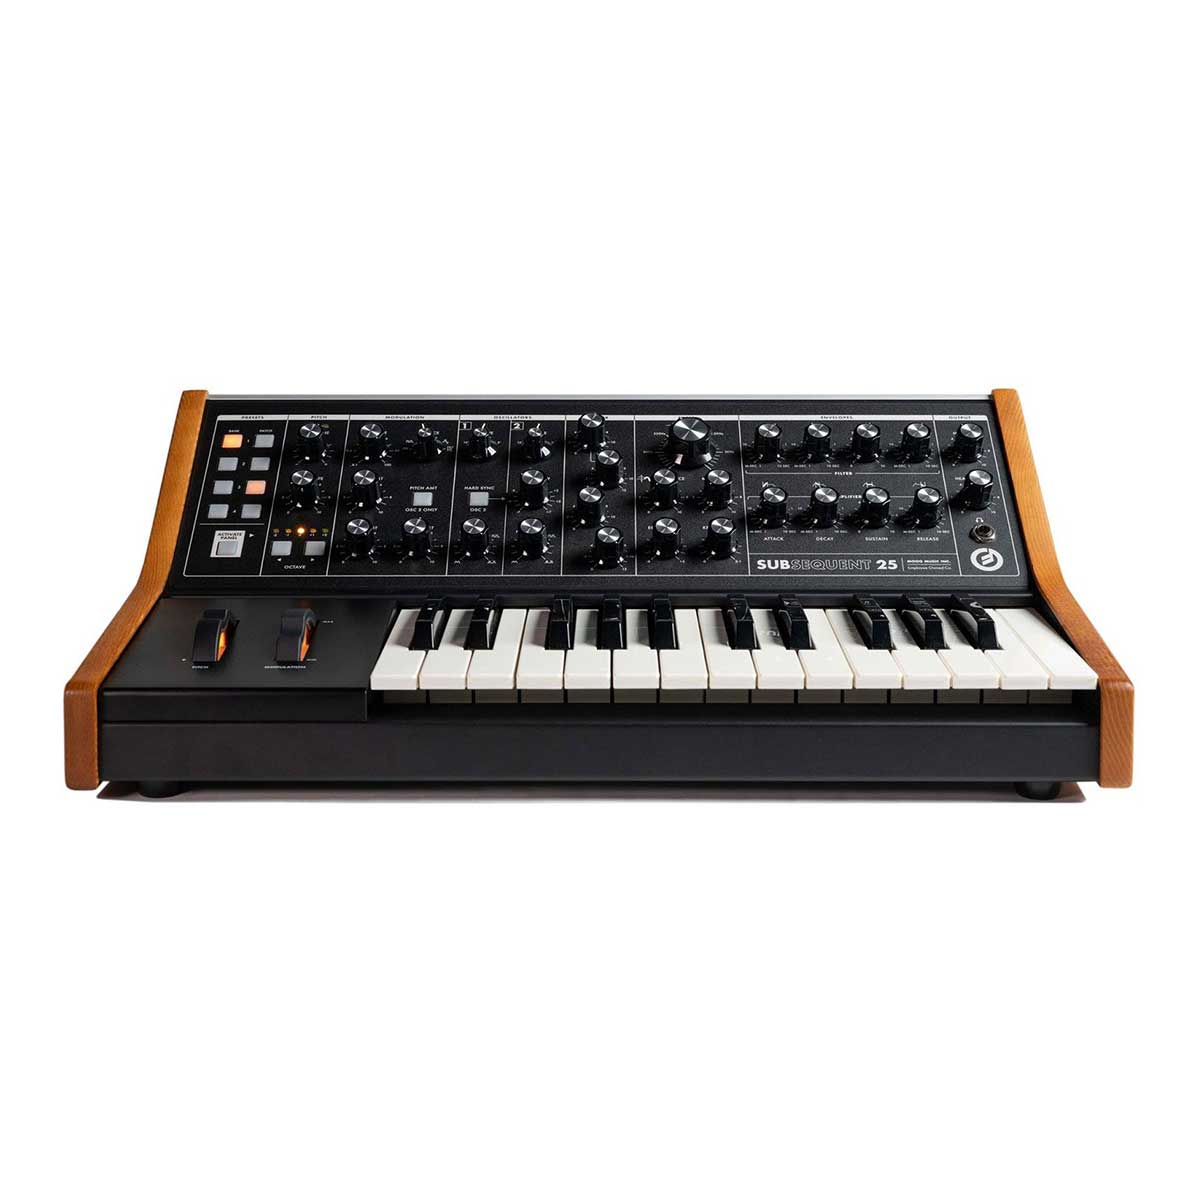 Moog Subsequent 25 paraphonic analog synthesizer Front